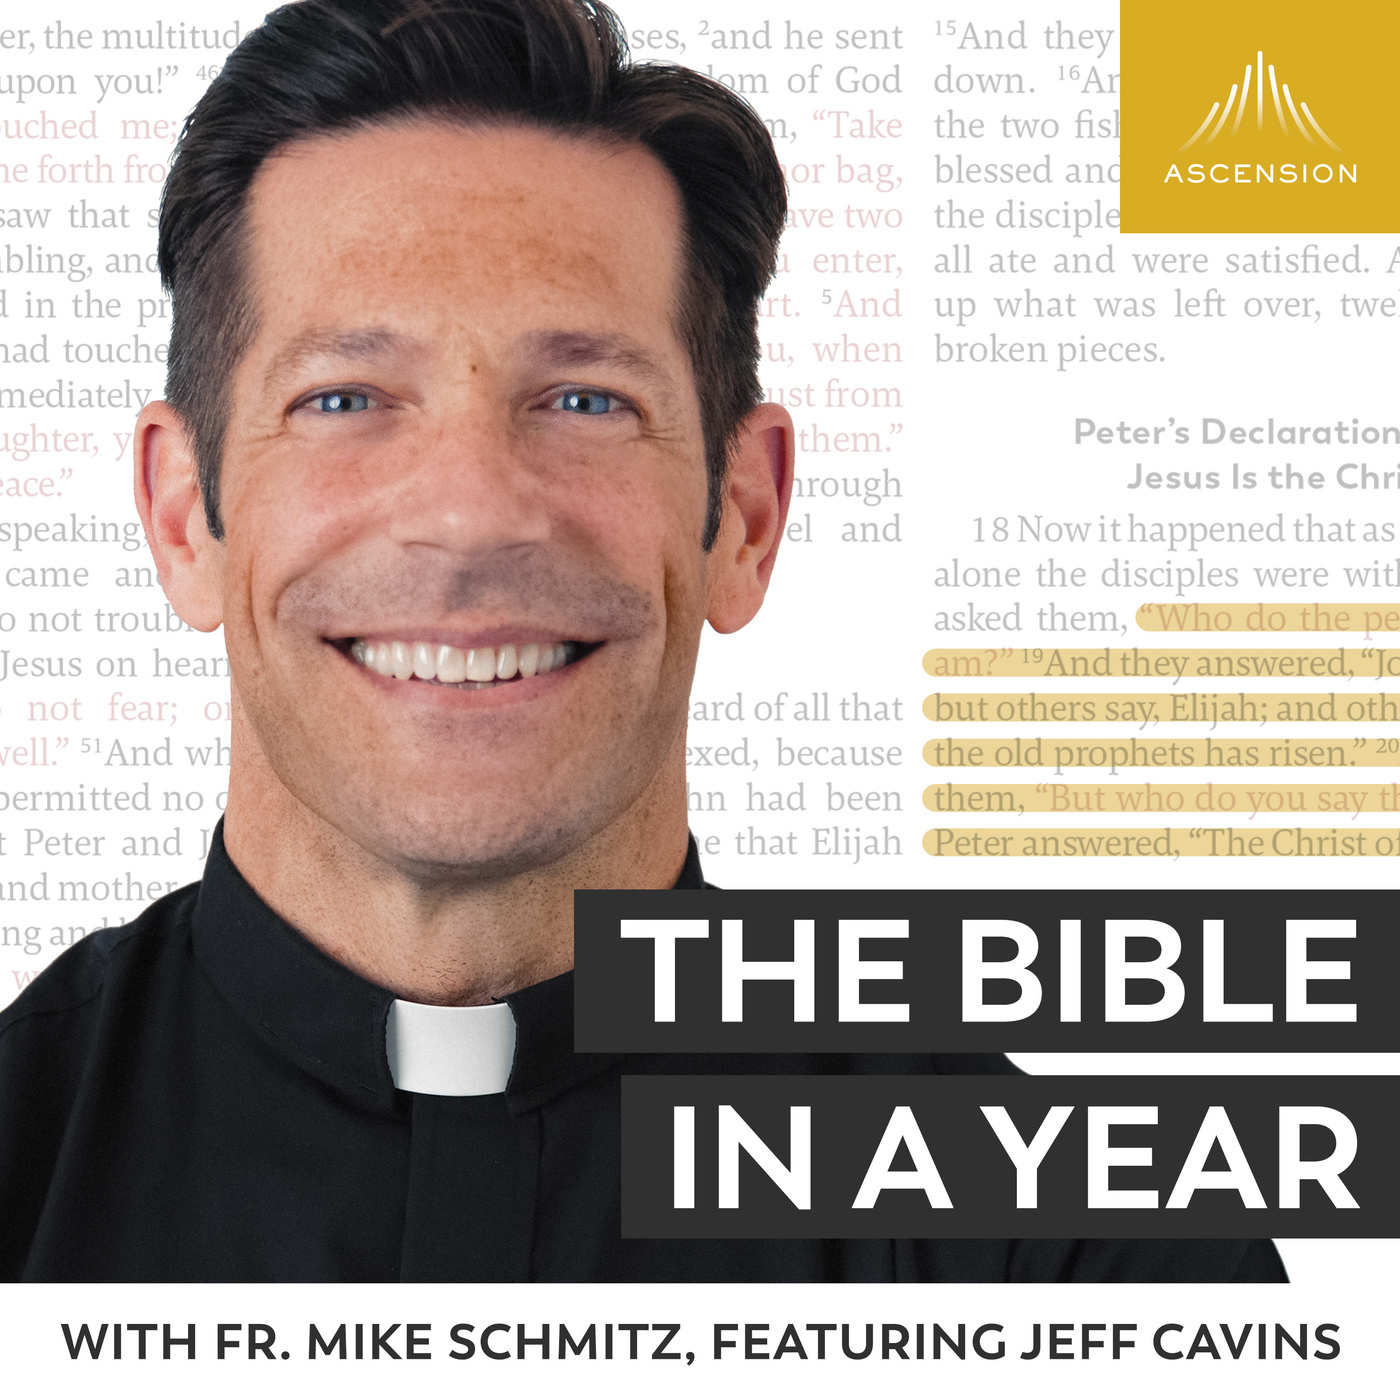 The Bible in a Year (with Fr. Mike Schmitz): Day 270: God's Favor with Ezra (2023)